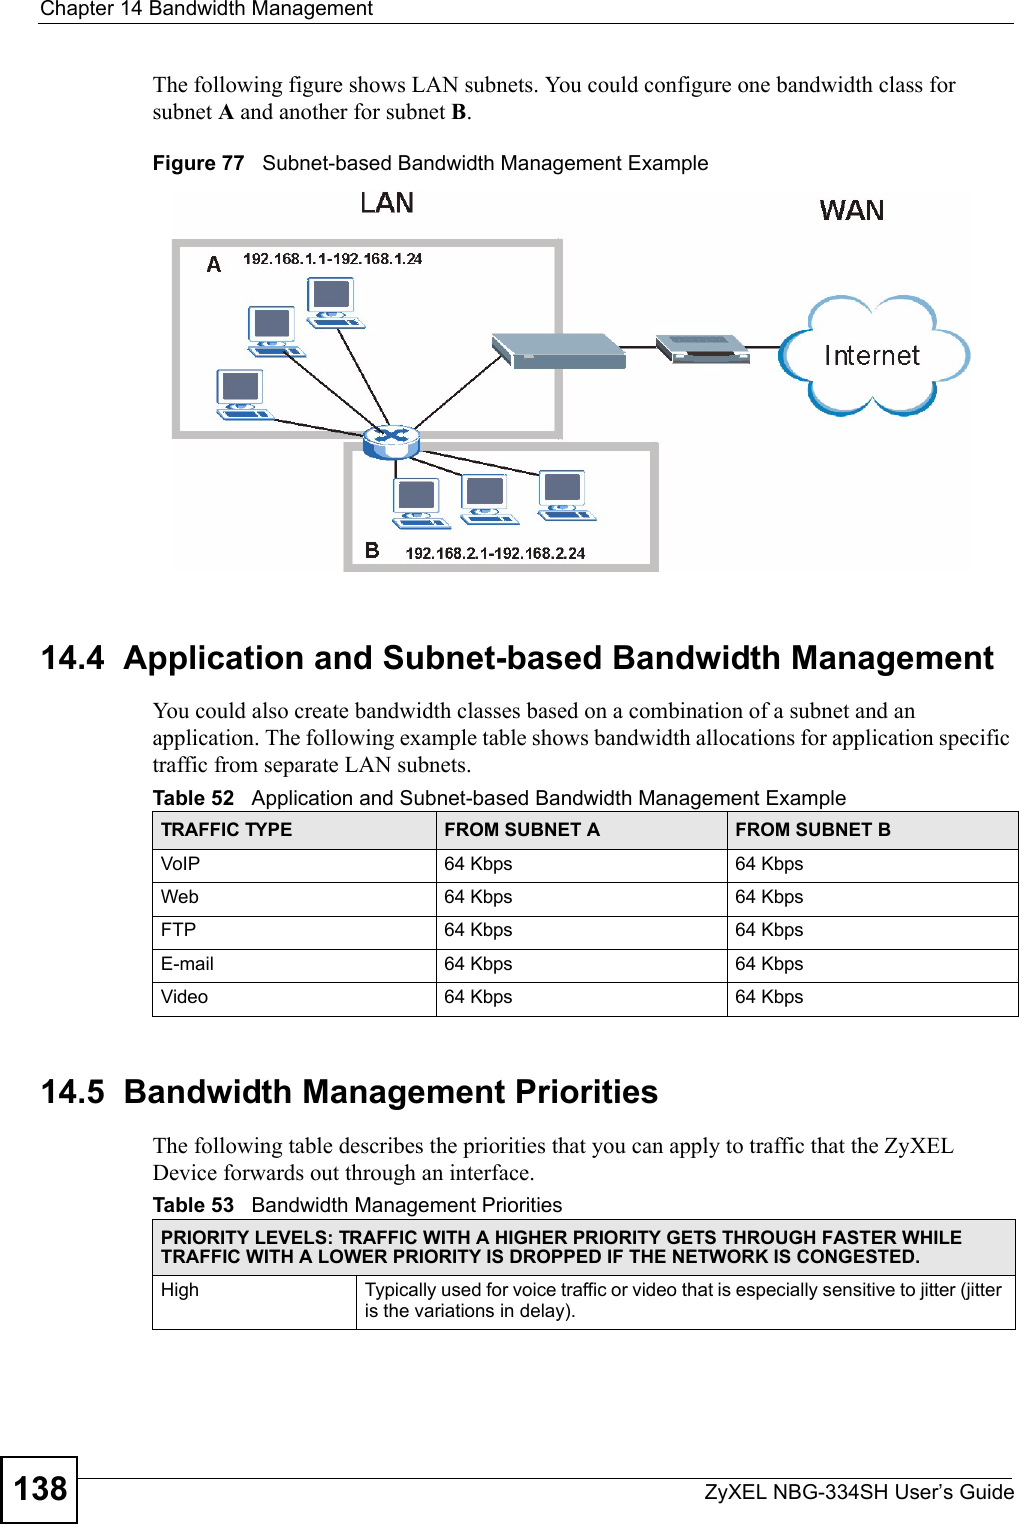 Chapter 14 Bandwidth ManagementZyXEL NBG-334SH User’s Guide138The following figure shows LAN subnets. You could configure one bandwidth class for subnet A and another for subnet B. Figure 77   Subnet-based Bandwidth Management Example14.4  Application and Subnet-based Bandwidth ManagementYou could also create bandwidth classes based on a combination of a subnet and an application. The following example table shows bandwidth allocations for application specific traffic from separate LAN subnets.14.5  Bandwidth Management Priorities  The following table describes the priorities that you can apply to traffic that the ZyXEL Device forwards out through an interface.Table 52   Application and Subnet-based Bandwidth Management Example TRAFFIC TYPE FROM SUBNET A FROM SUBNET BVoIP 64 Kbps 64 KbpsWeb 64 Kbps 64 KbpsFTP 64 Kbps 64 KbpsE-mail 64 Kbps 64 KbpsVideo 64 Kbps 64 KbpsTable 53   Bandwidth Management PrioritiesPRIORITY LEVELS: TRAFFIC WITH A HIGHER PRIORITY GETS THROUGH FASTER WHILE TRAFFIC WITH A LOWER PRIORITY IS DROPPED IF THE NETWORK IS CONGESTED.High Typically used for voice traffic or video that is especially sensitive to jitter (jitter is the variations in delay).